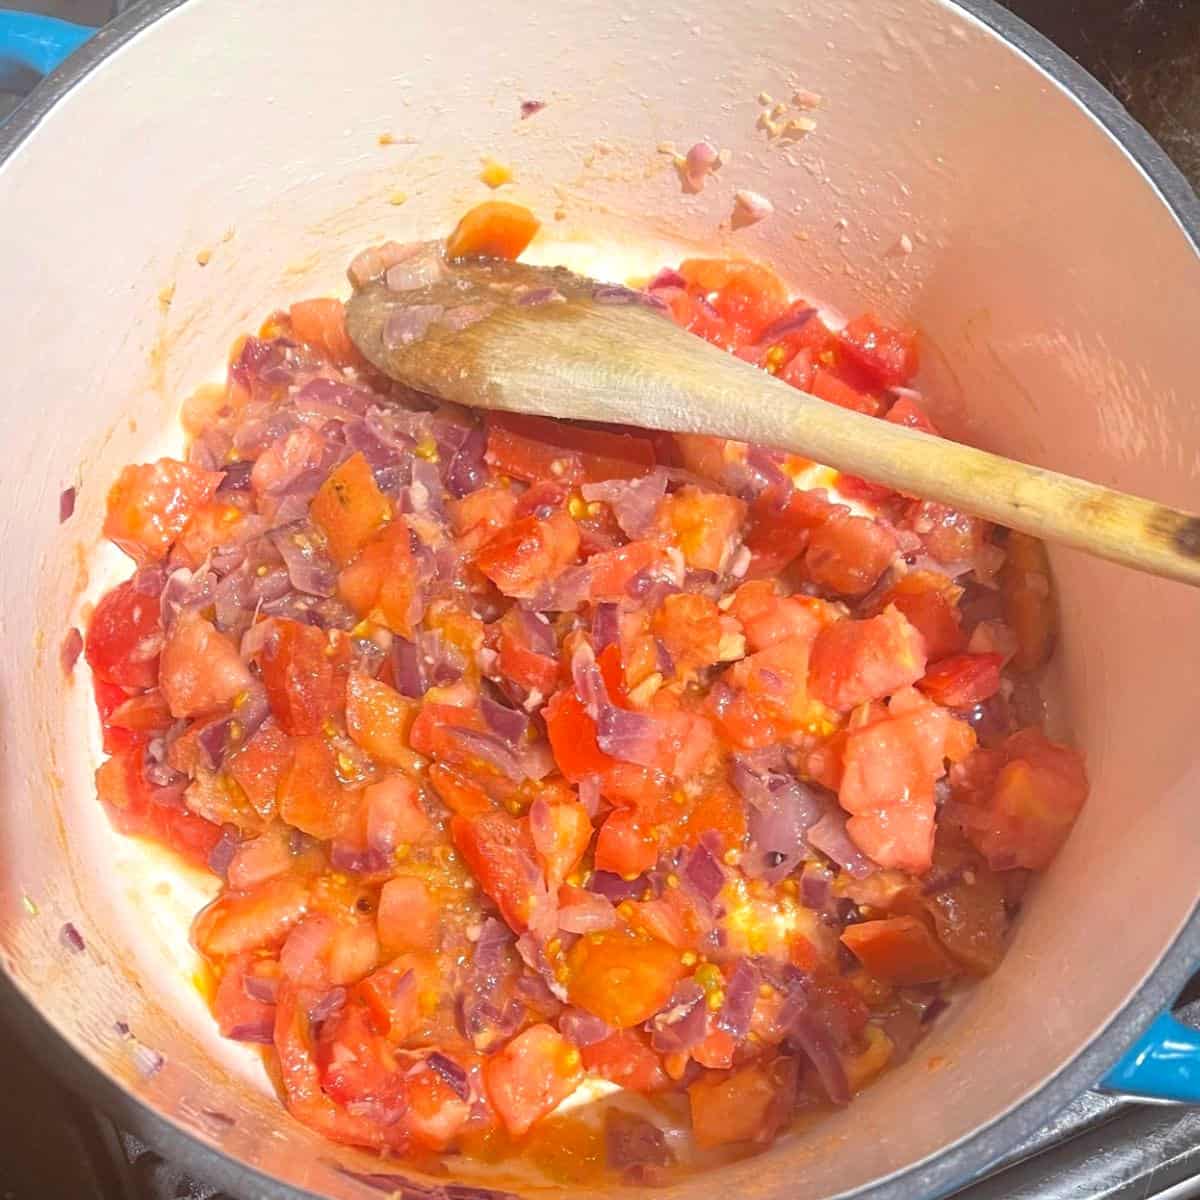 Tomatoes and onions sauteing in pot with wooden spatula.